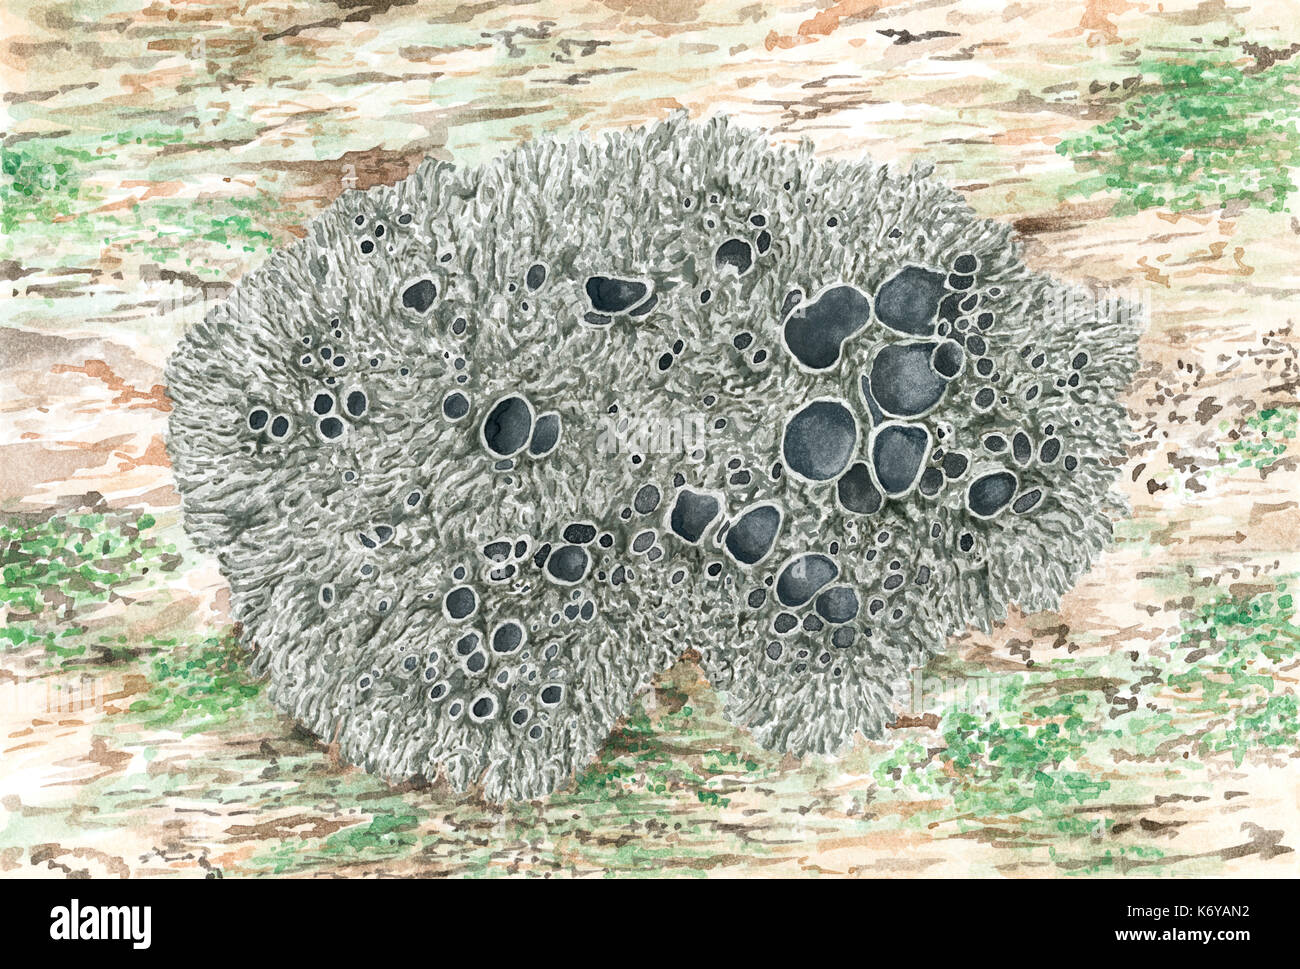 Drawing of a foliose lichen Xanthoparmelia conspersa (Peppered rock-shield). Watercolor on rough paper. Stock Photo